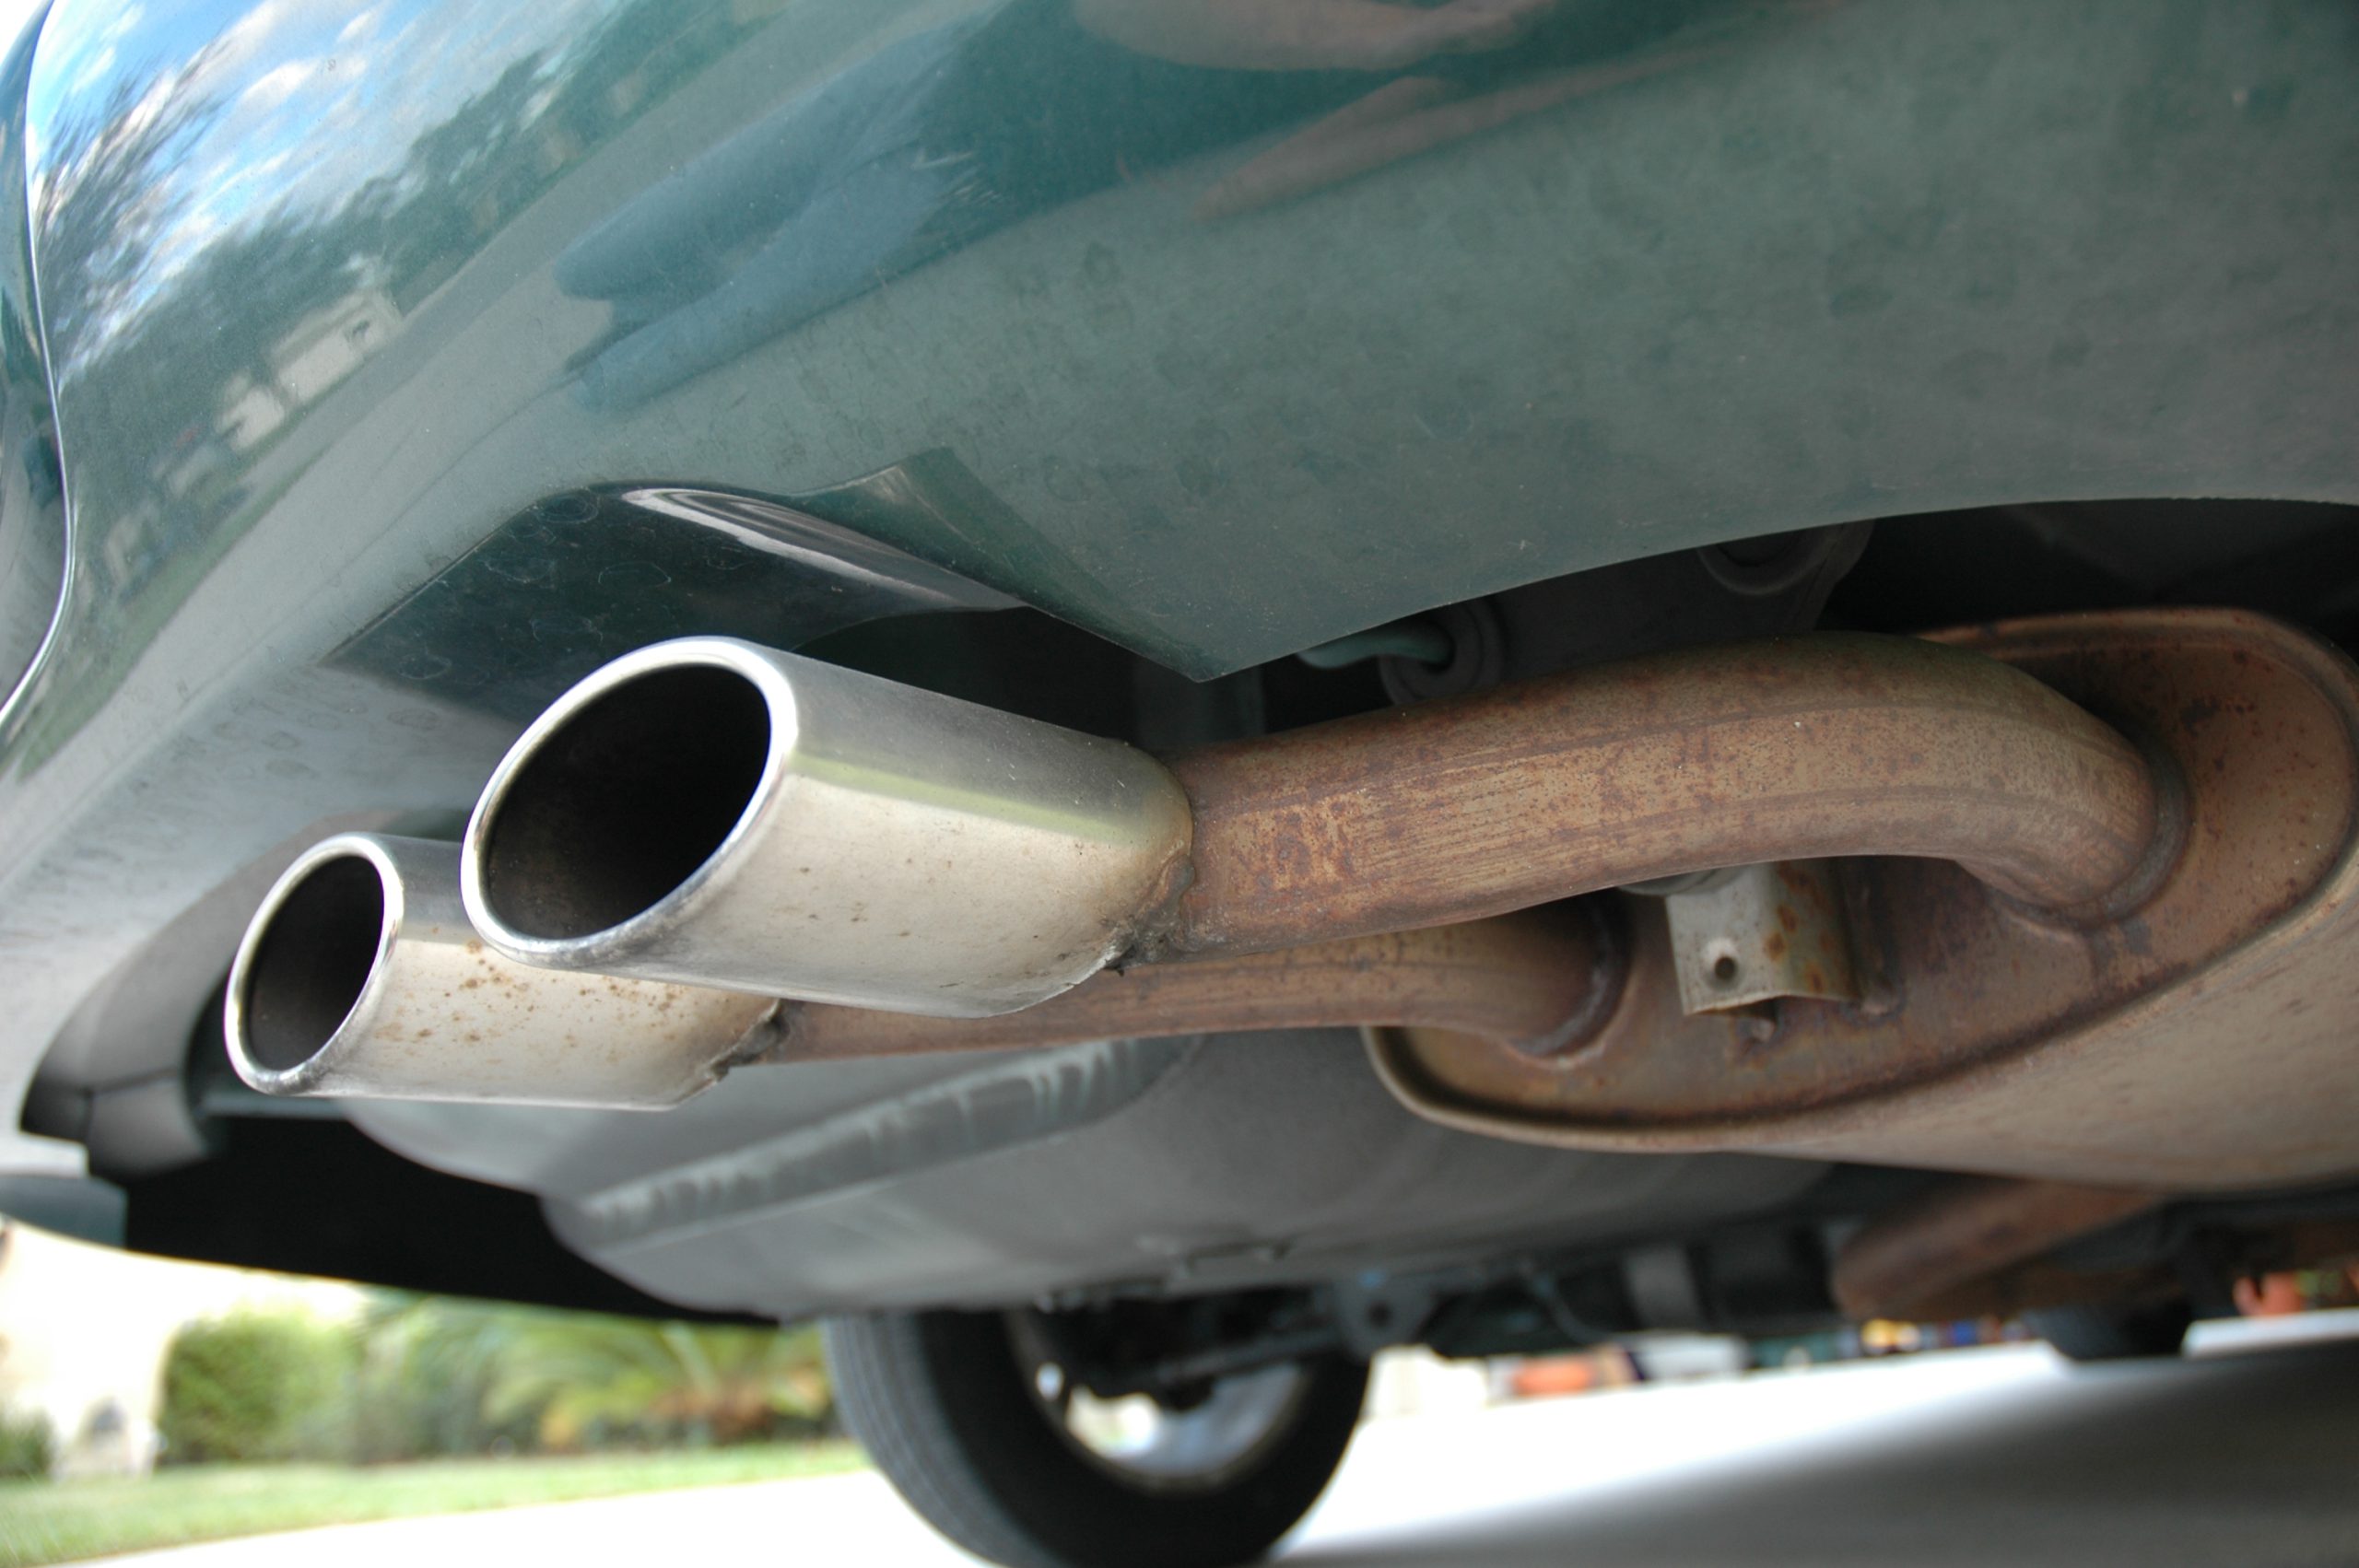 The easily neglected car parts: muffler